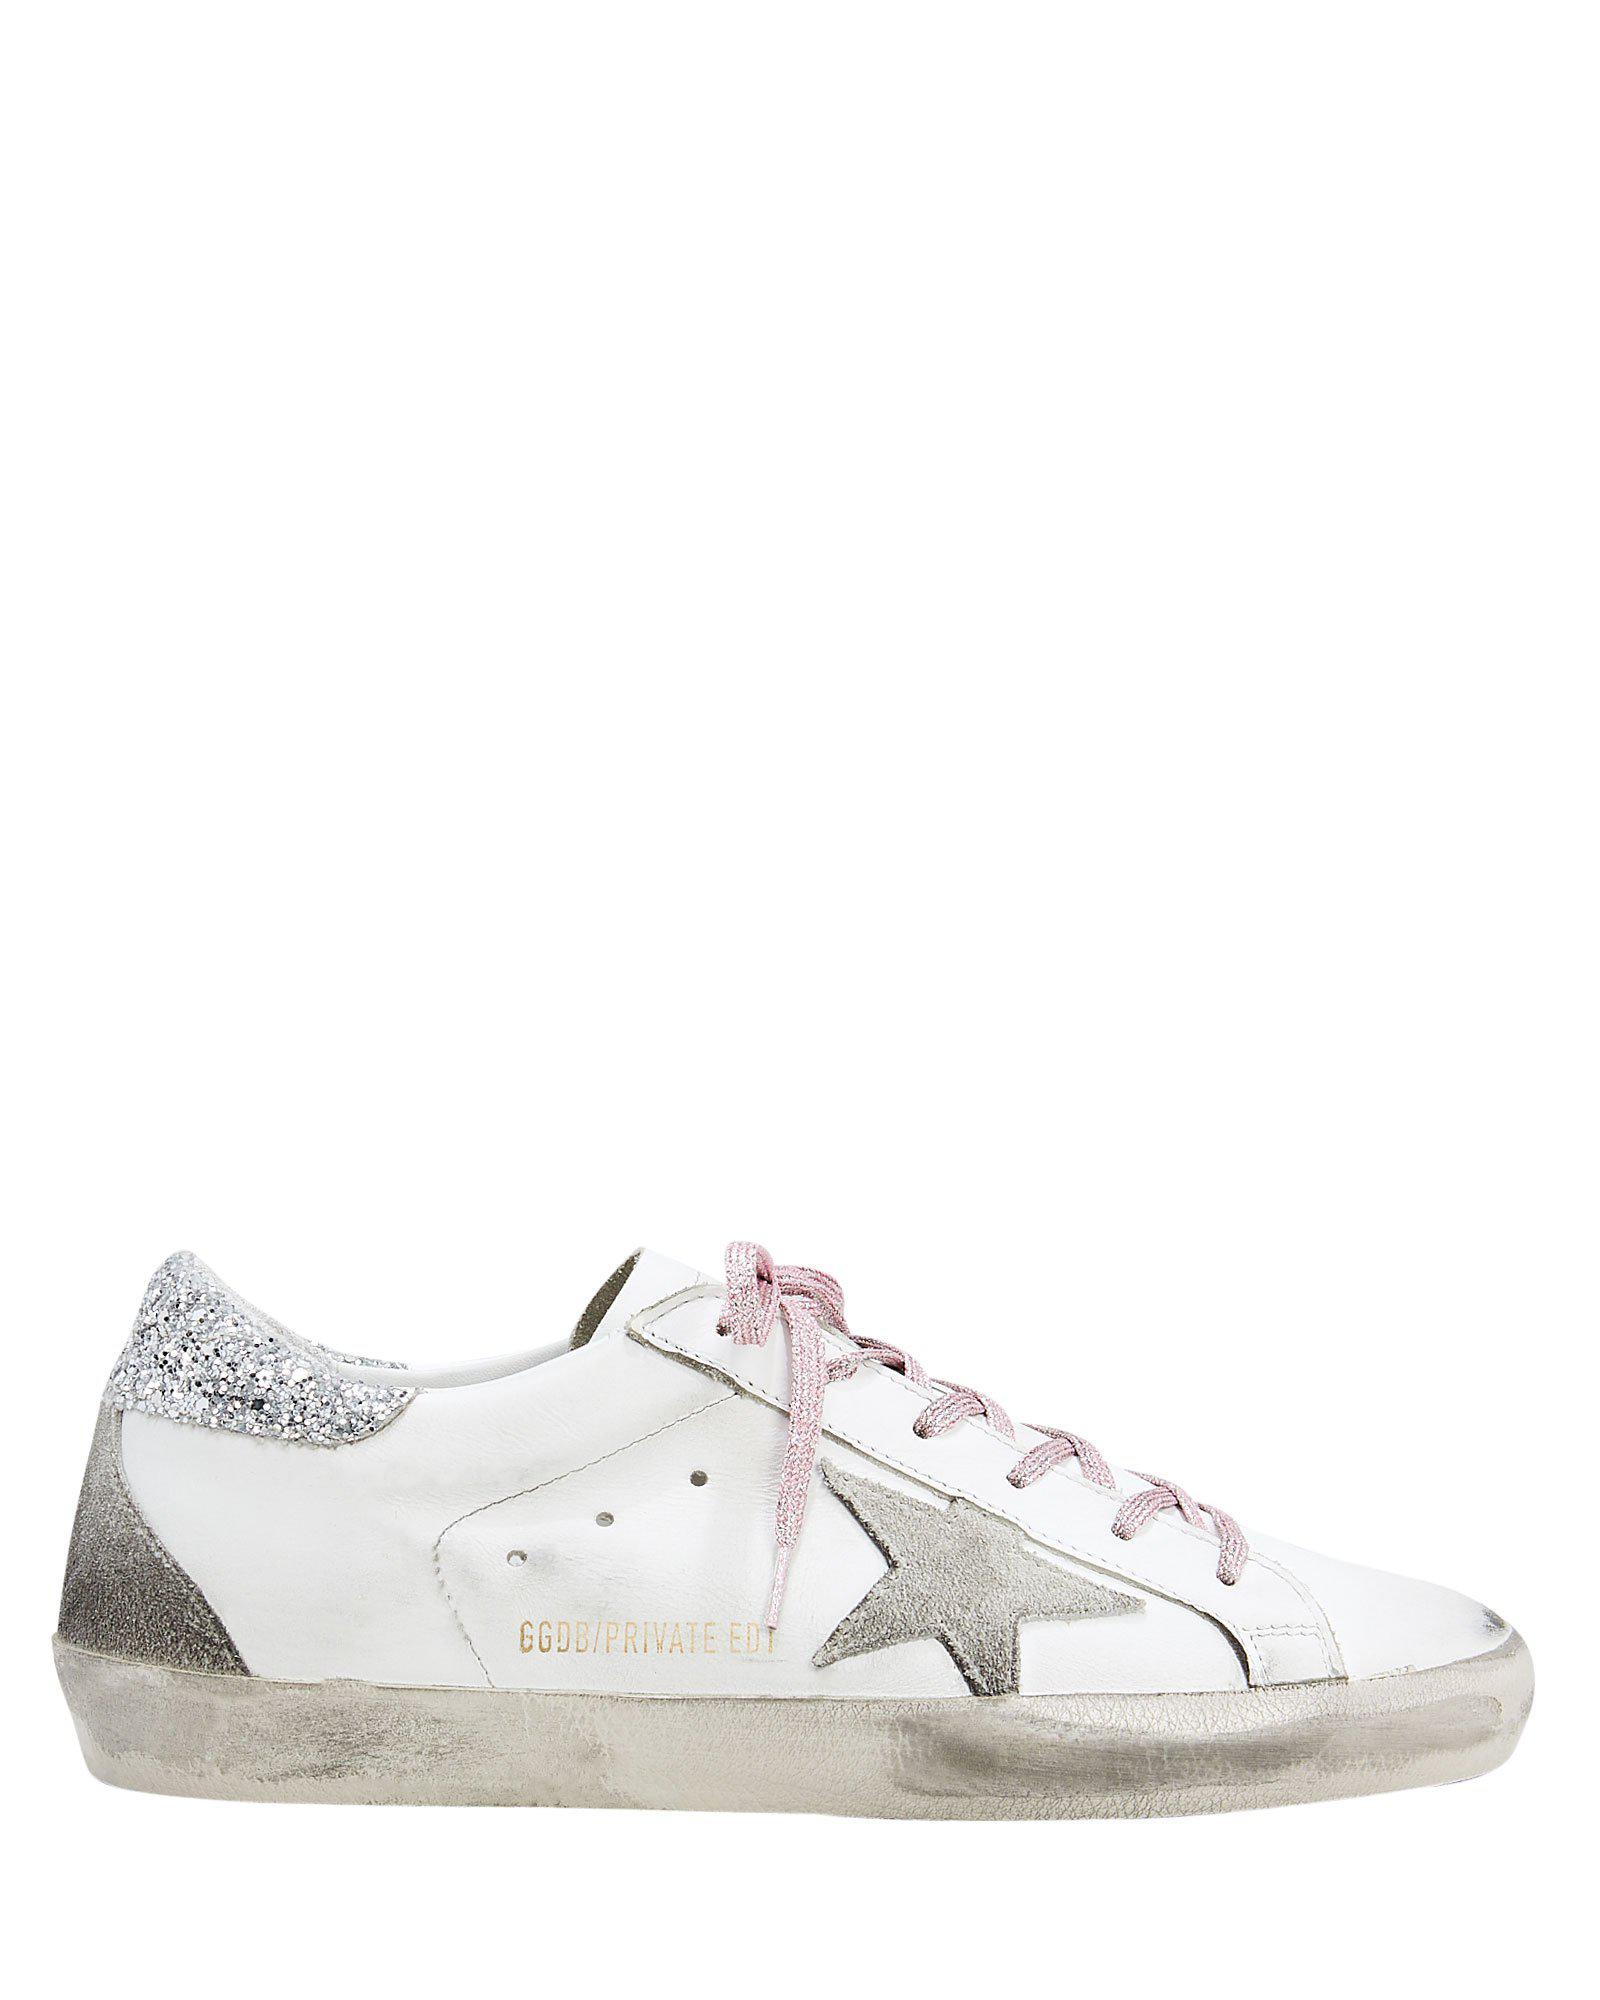 Golden Goose Superstar Pink Glitter Laces Low-top Sneakers in White | Lyst